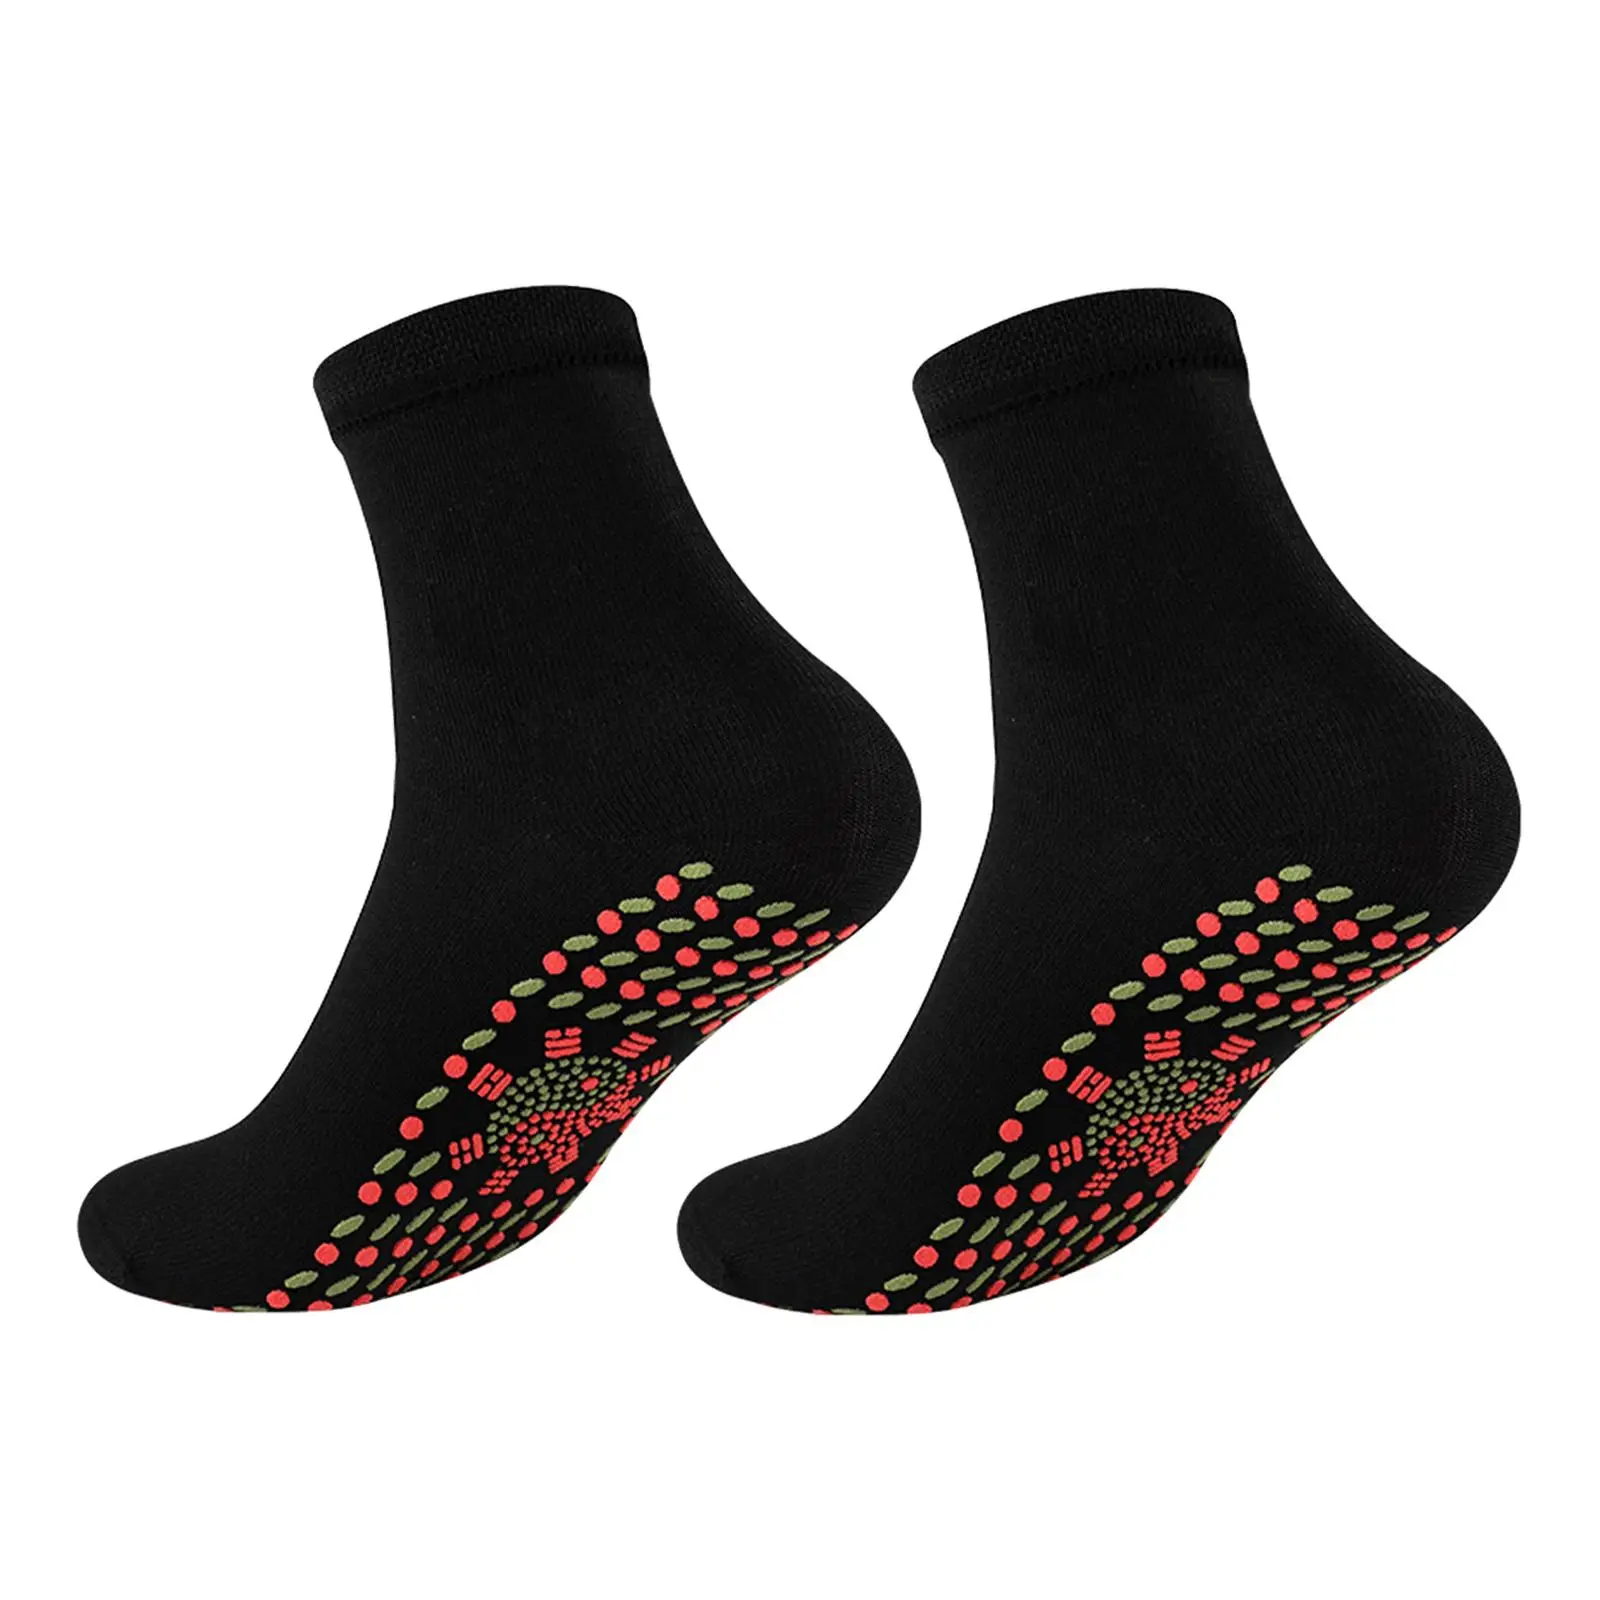 Heated Socks Breathable Cold Resistant Winter Self Heating Socks for Camping